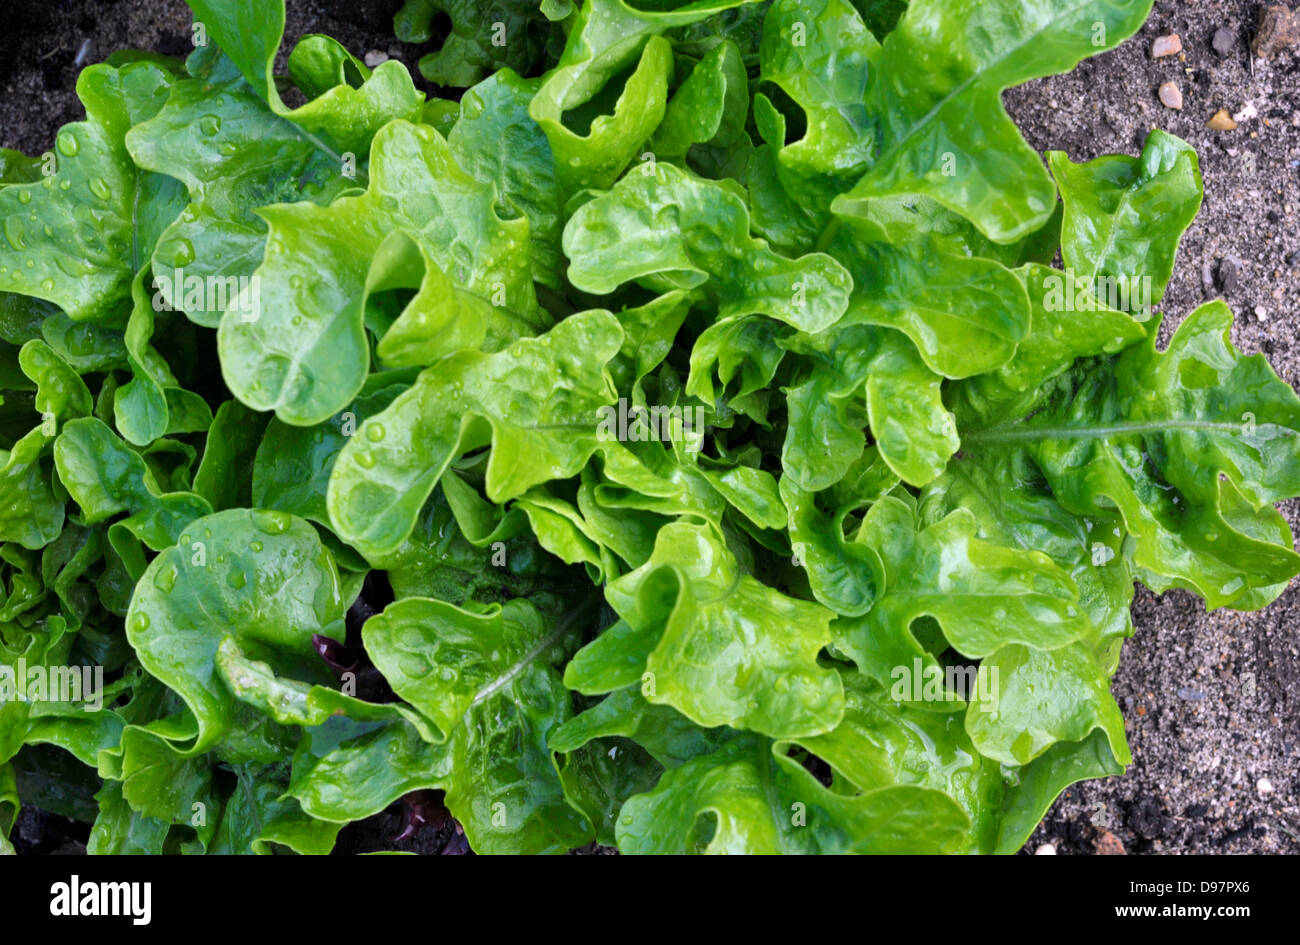 Green leaf lettuce growing on a vegetable plot. Stock Photo